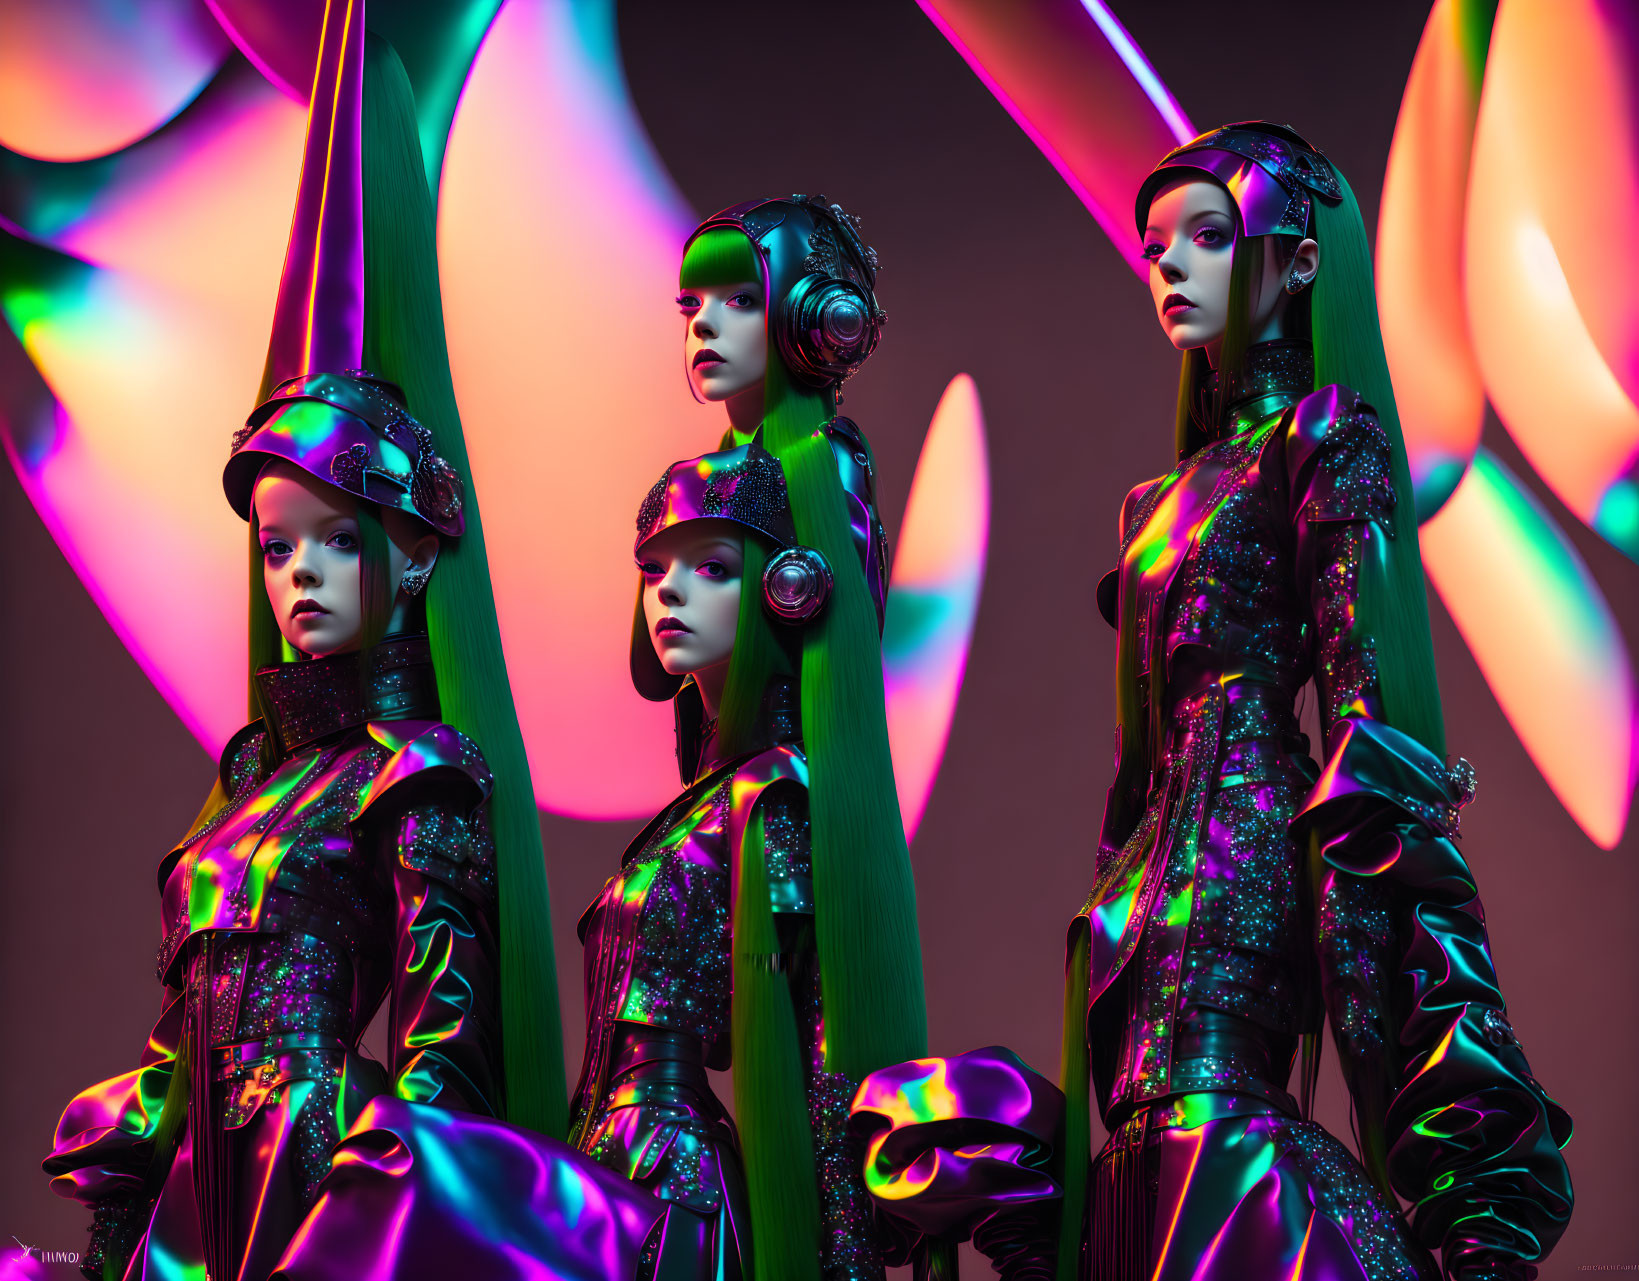 Four futuristic female mannequins in green and purple attire against abstract light shapes.